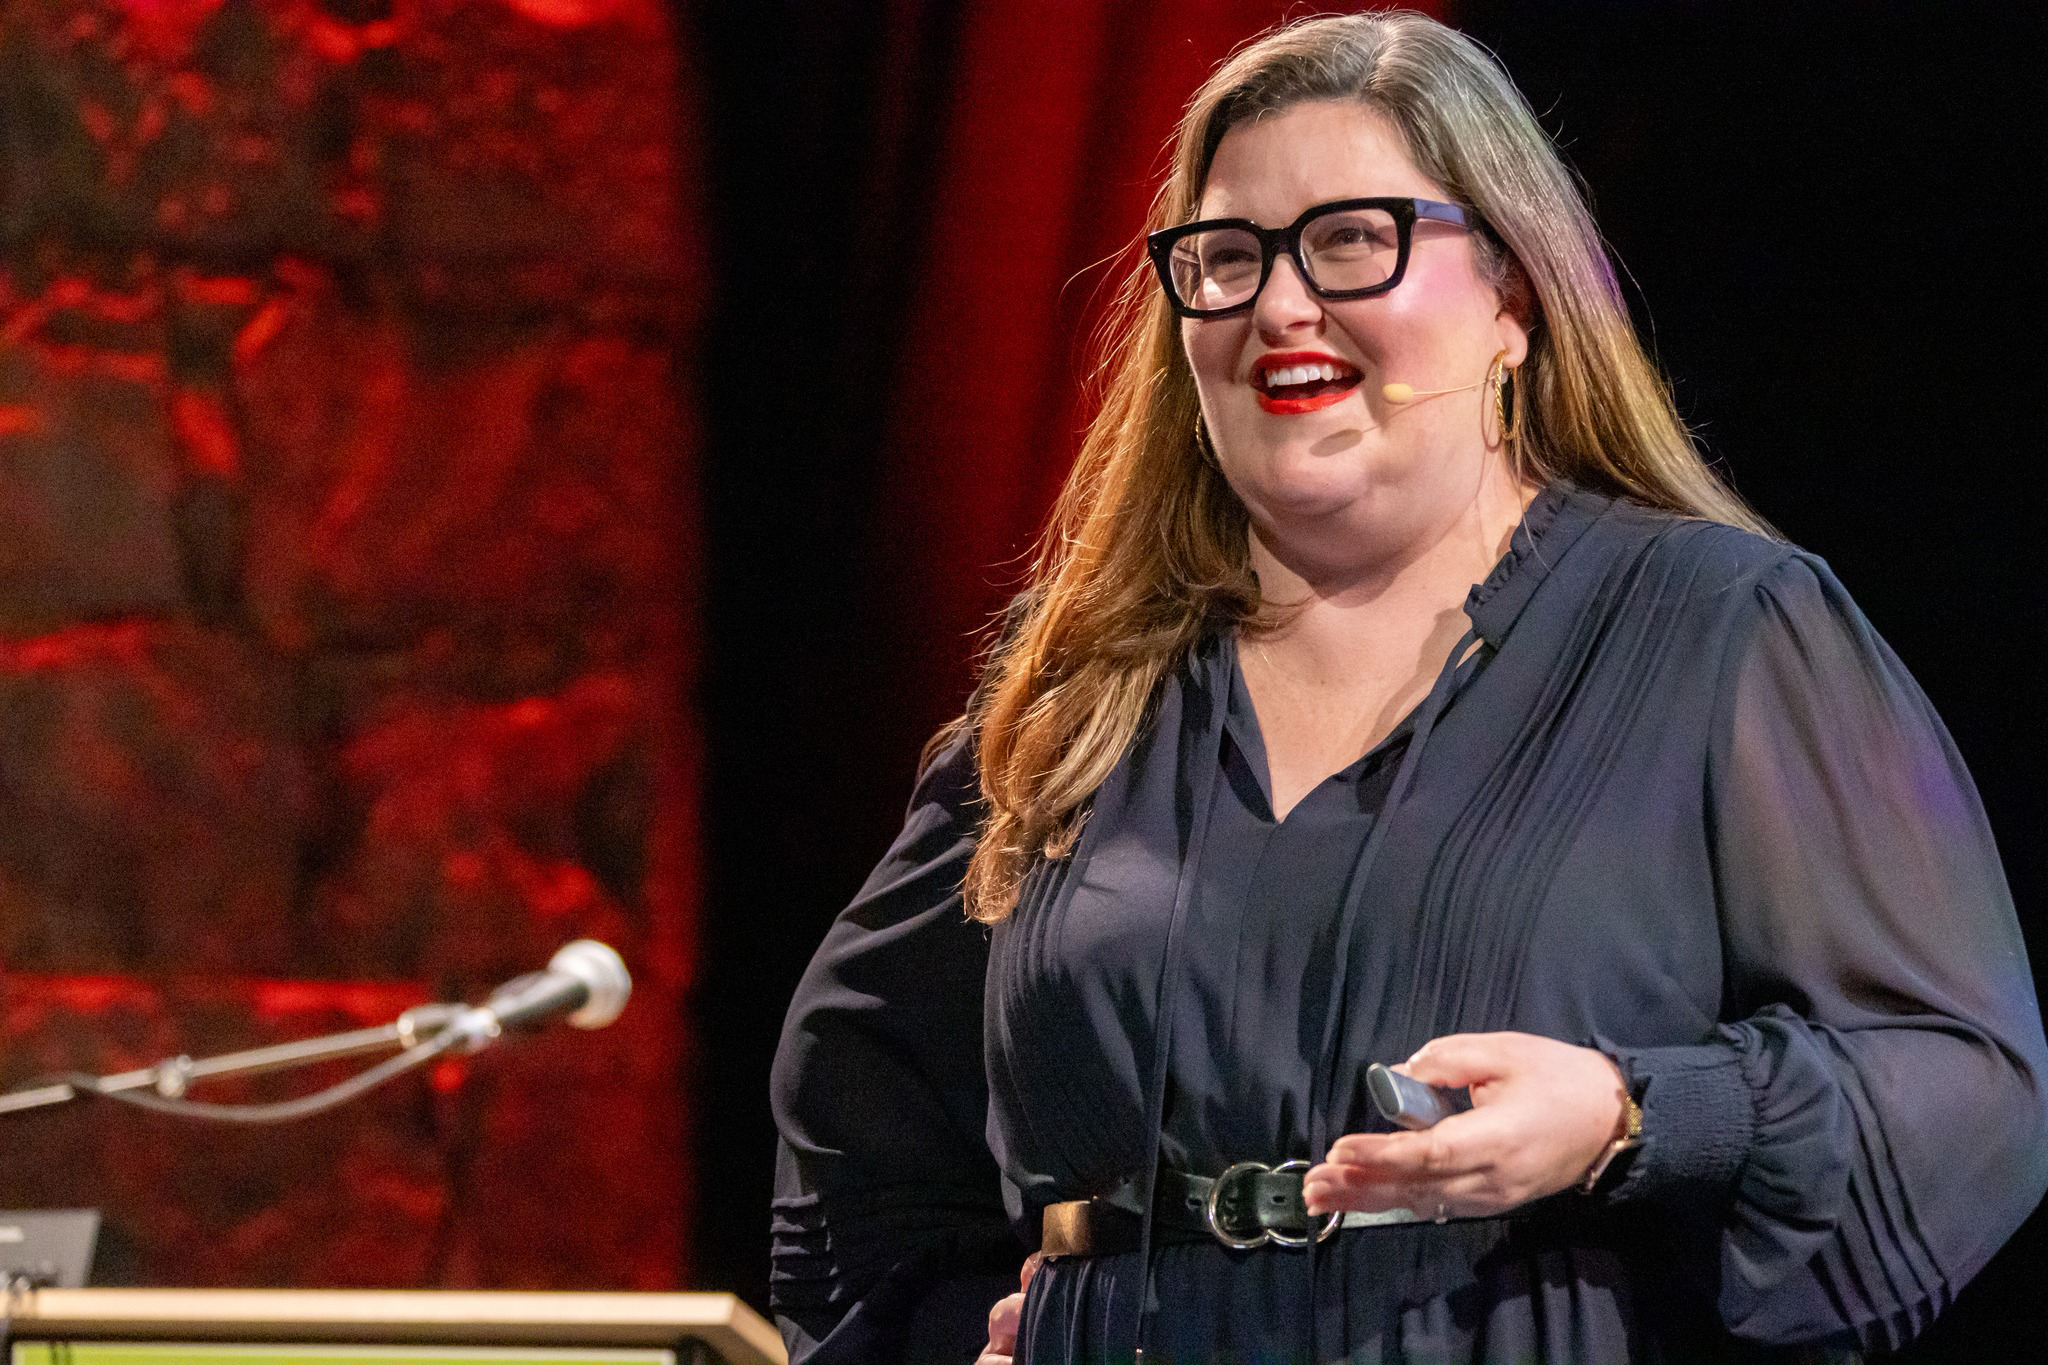 Avery Swartz wears black rimmed glasses, a navy dress, and smiles while on stage speaking